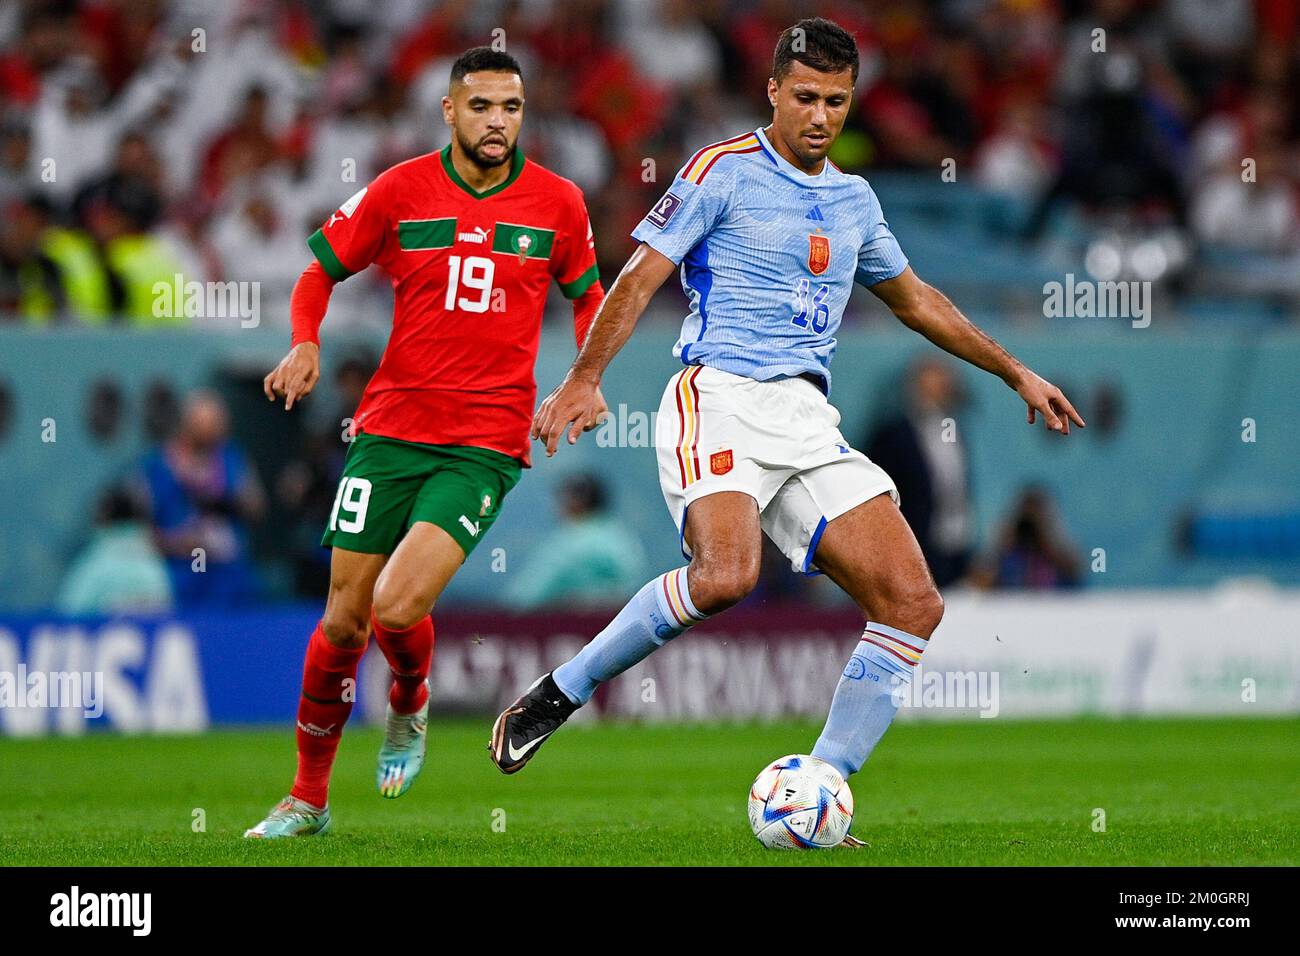 AL RAYYAN, QATAR - DECEMBER 6: Youssef En Nesyri of Morocco and Rodri of Spain during the Round of 16 - FIFA World Cup Qatar 2022 match between Morocco and Spain at the Education City Stadium on December 6, 2022 in Al Rayyan, Qatar (Photo by Pablo Morano/BSR Agency) Stock Photo